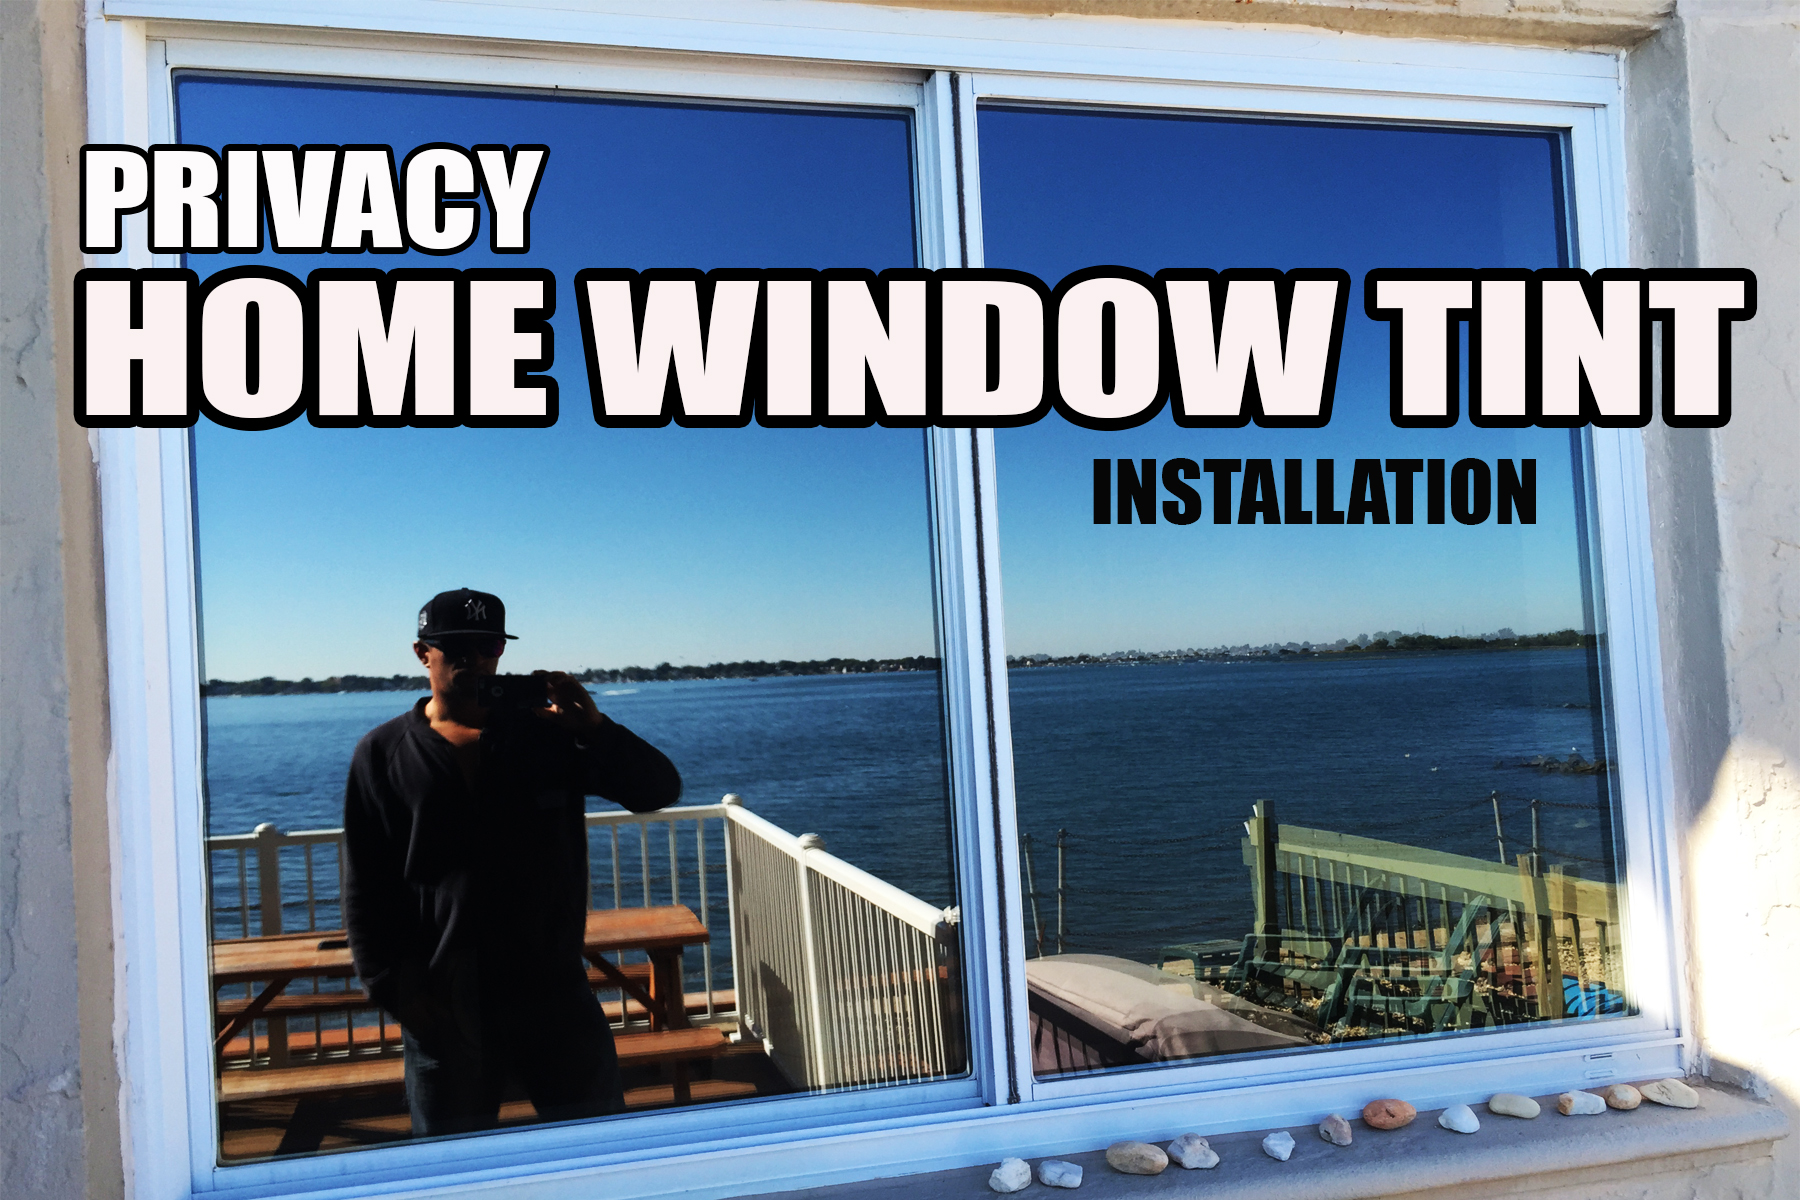 OUTSIDE VIEW OF PRIVACY WINDOW TINT